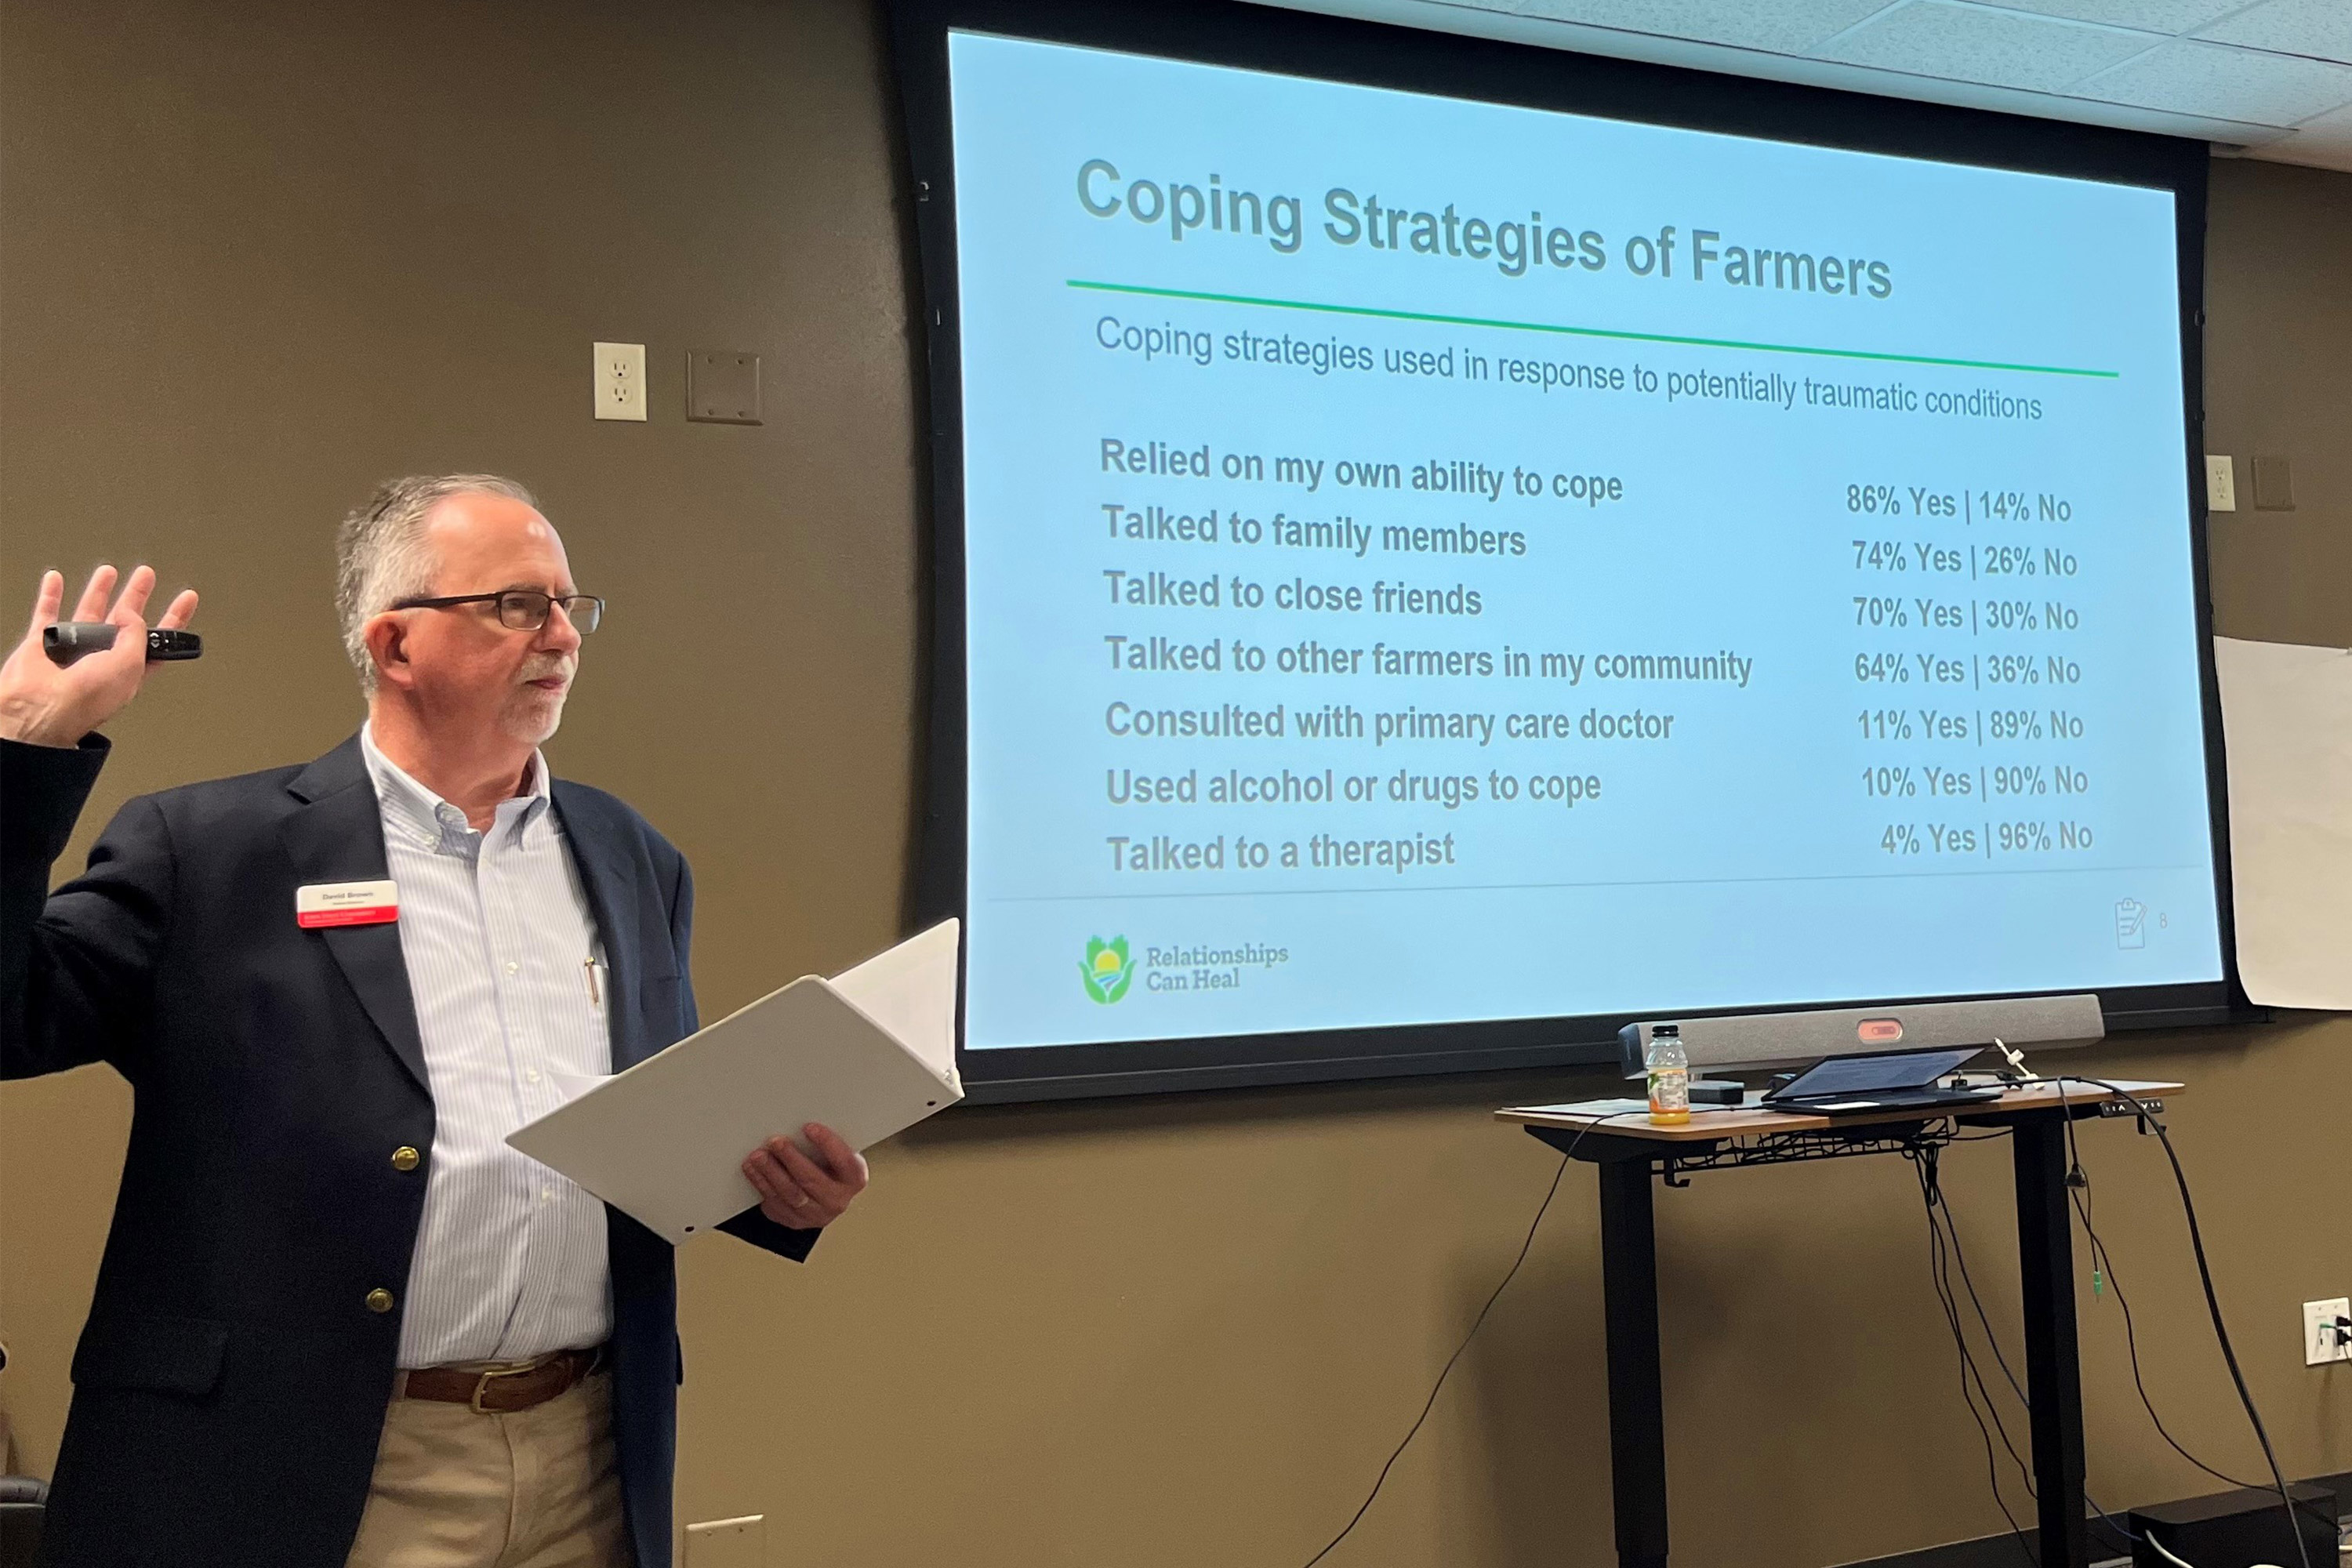 A photo of a therapist giving a slideshow presentation. The current slide shows mental health coping strategies used by farmers. 86% relied on their own ability to cope.